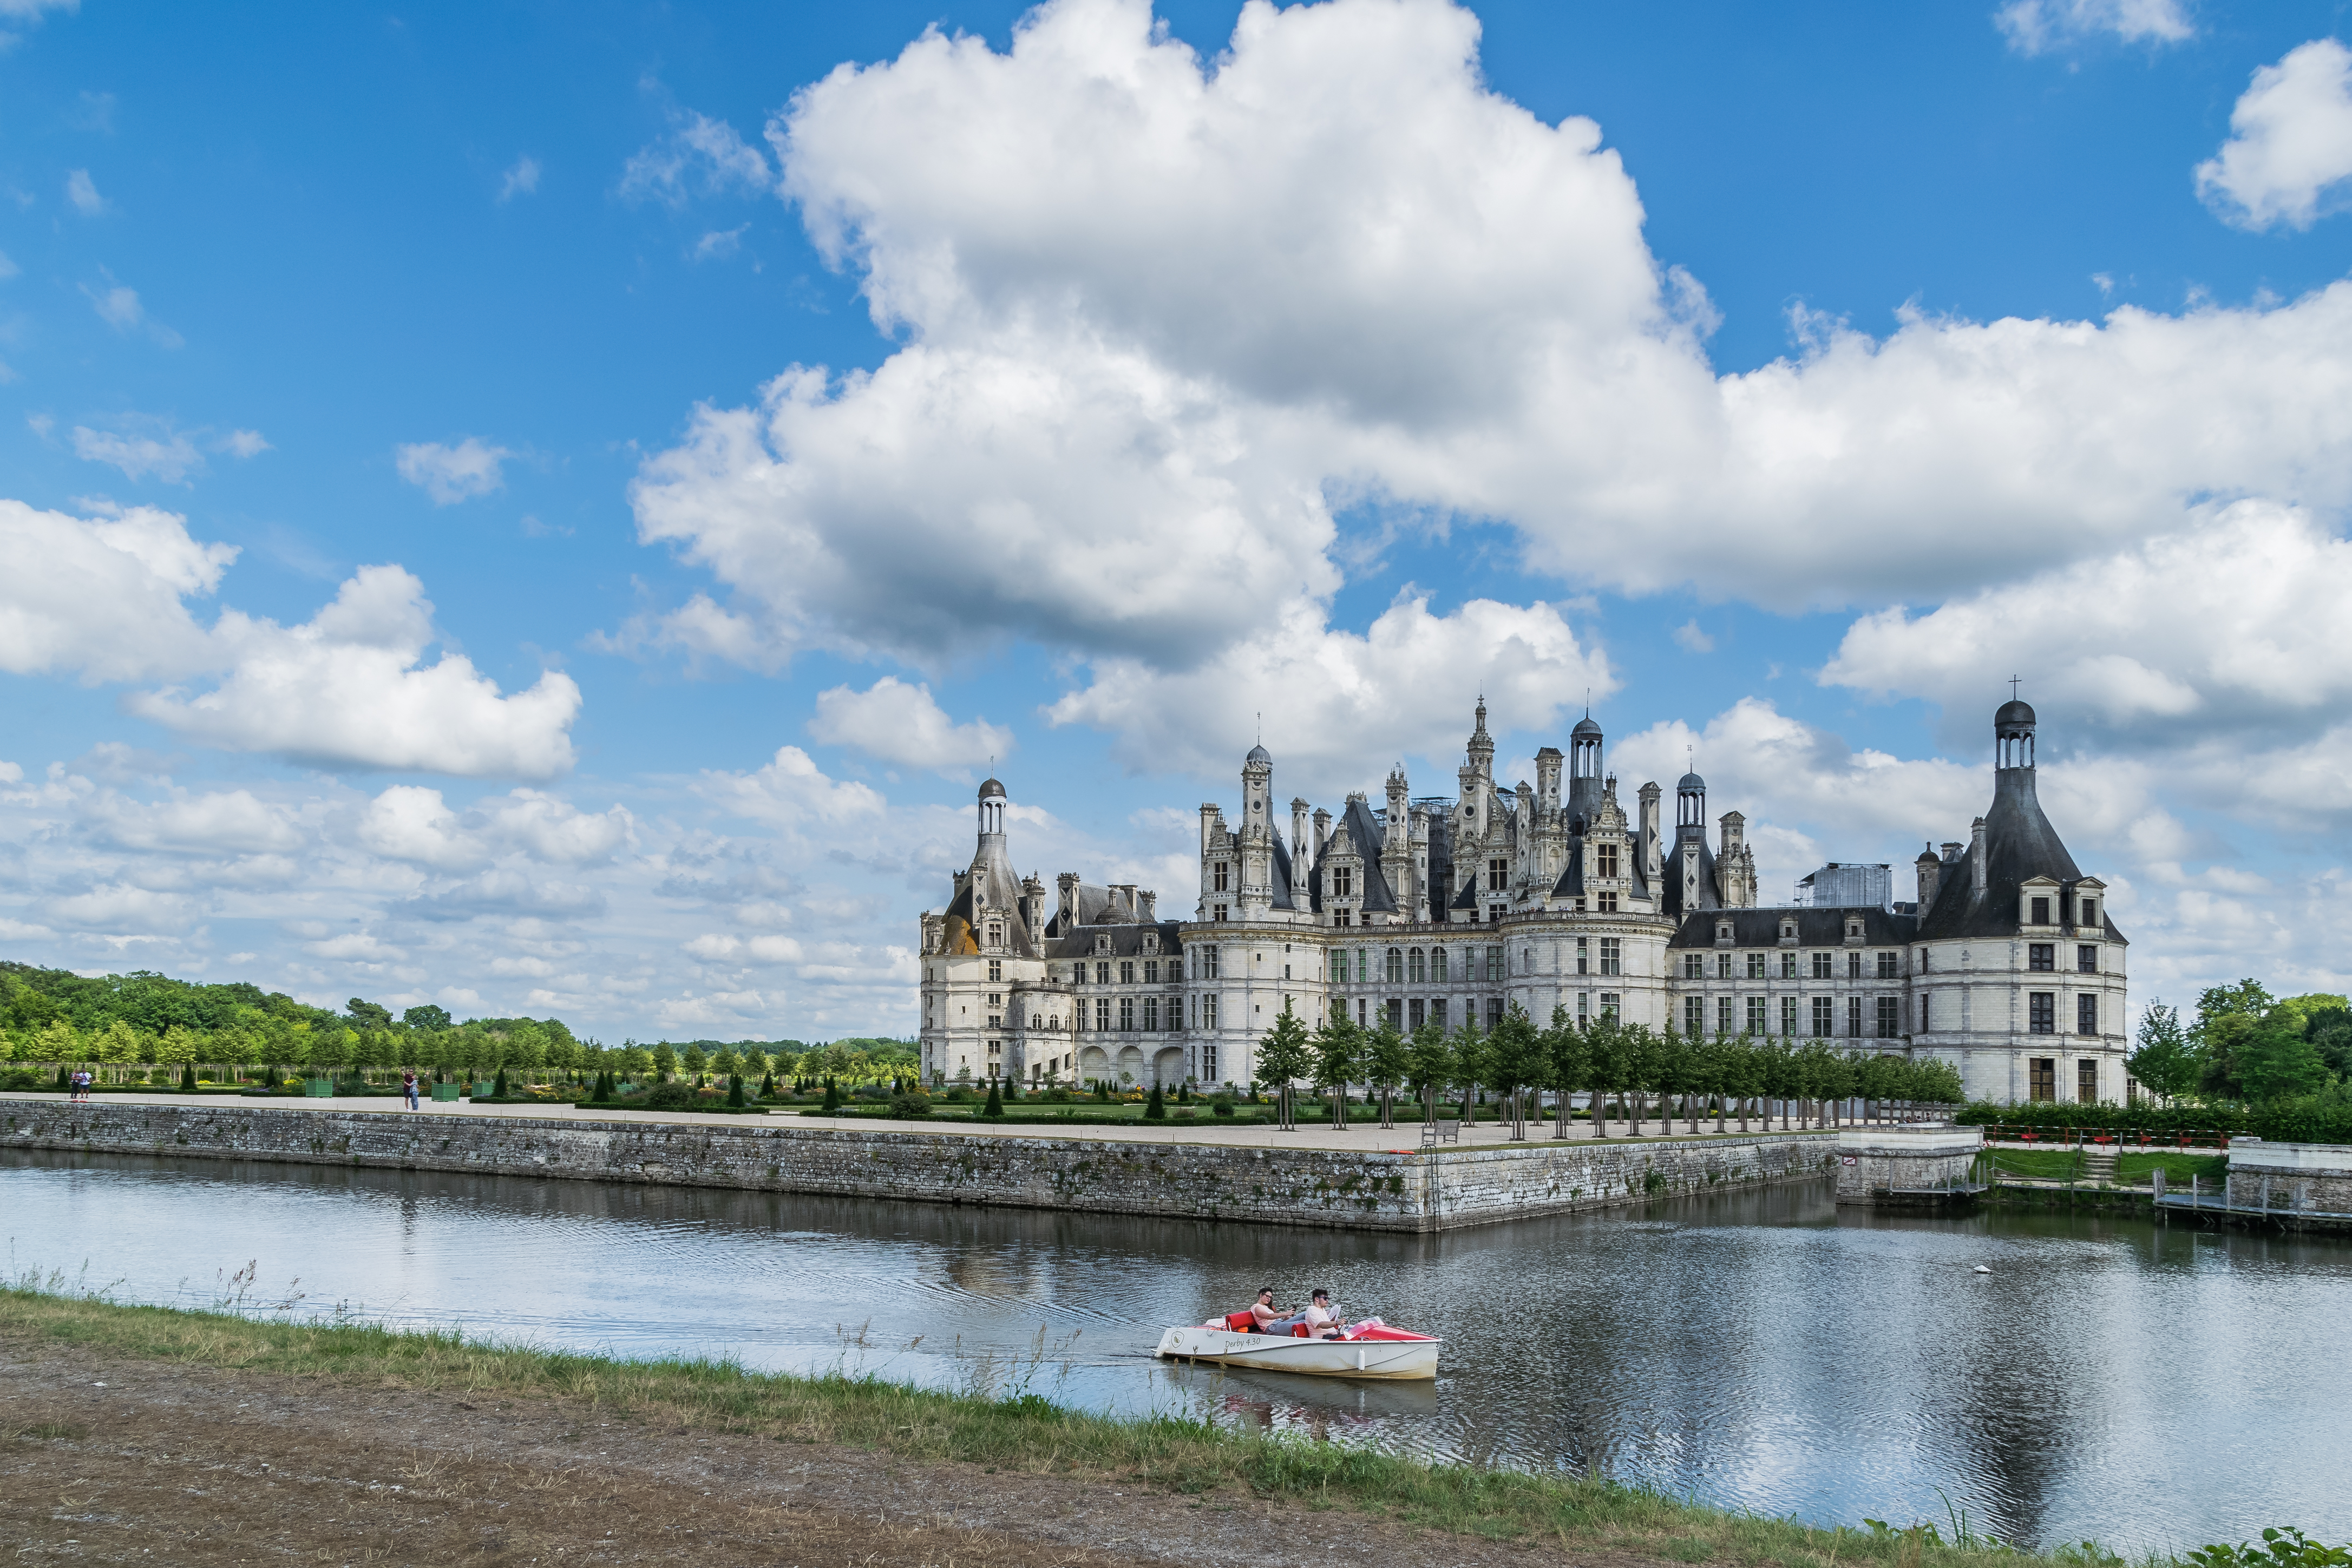 North-west exposure of the Chambord Castle 05